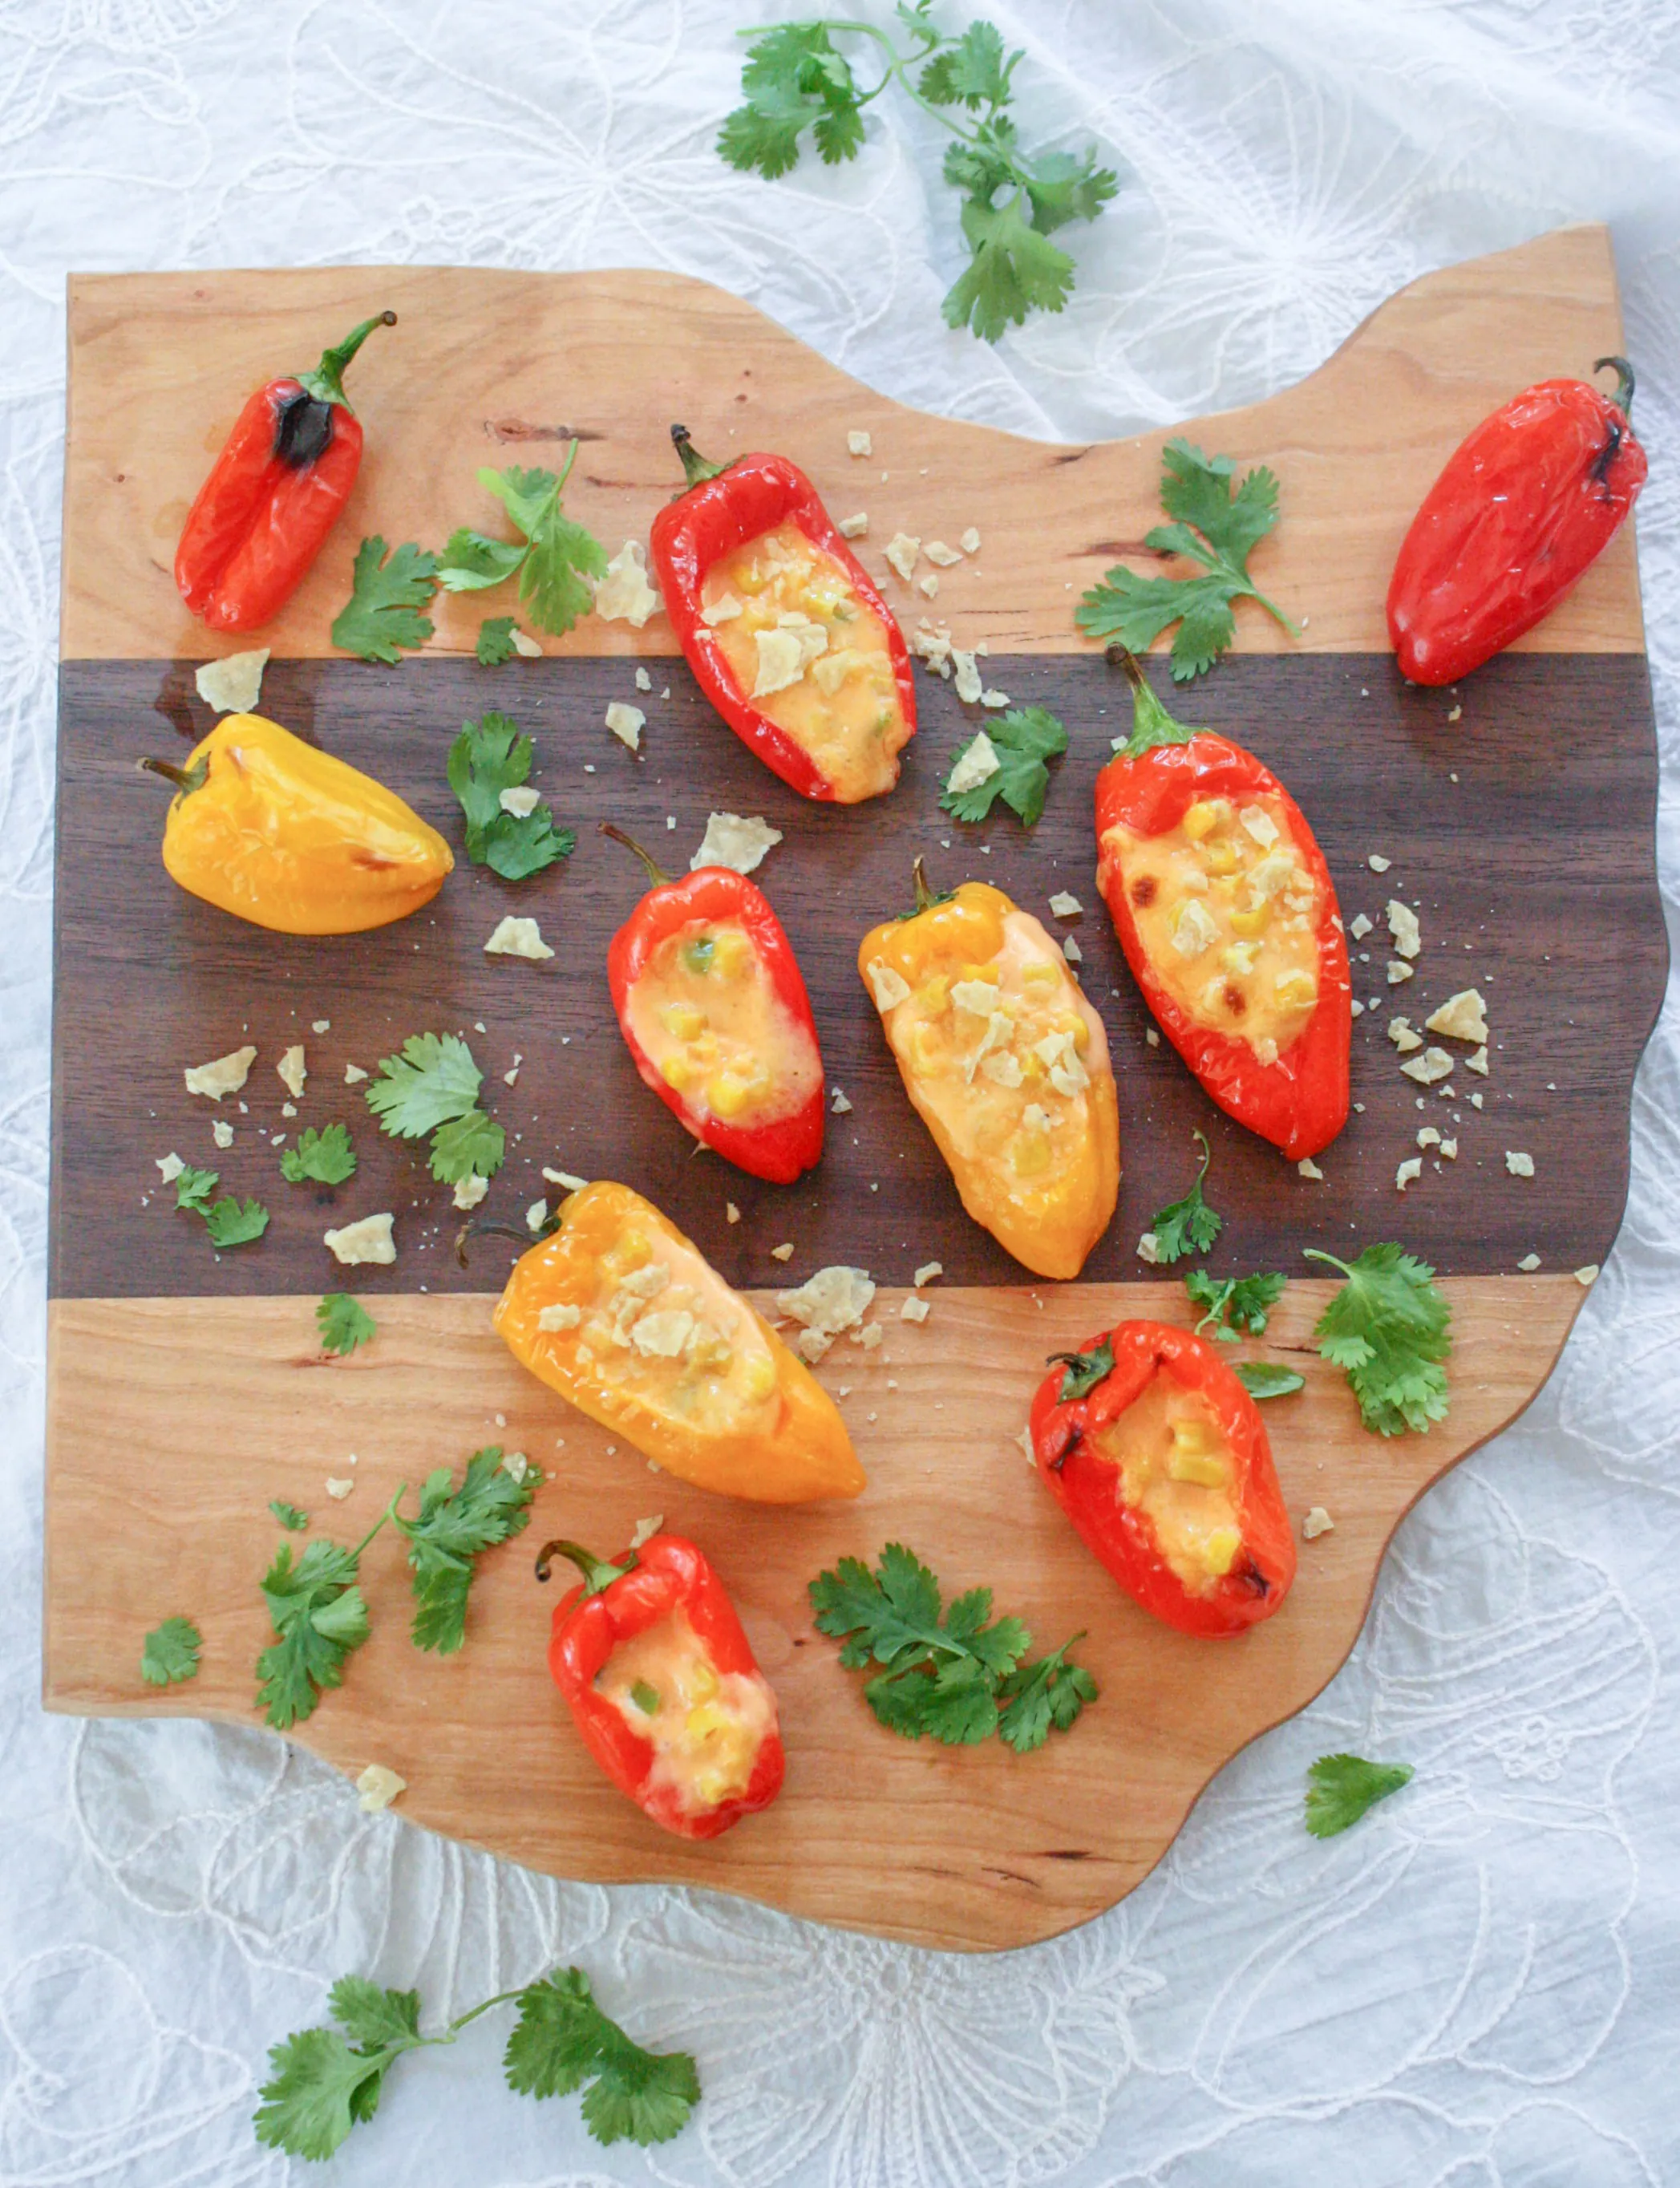 Cheesy Jalapeño & Corn Stuffed Sweet Pepper Poppers are a fun appetizer to serve anytime! Cheesy Jalapeño & Corn Stuffed Sweet Pepper Poppers make a great appetizer for any gathering.